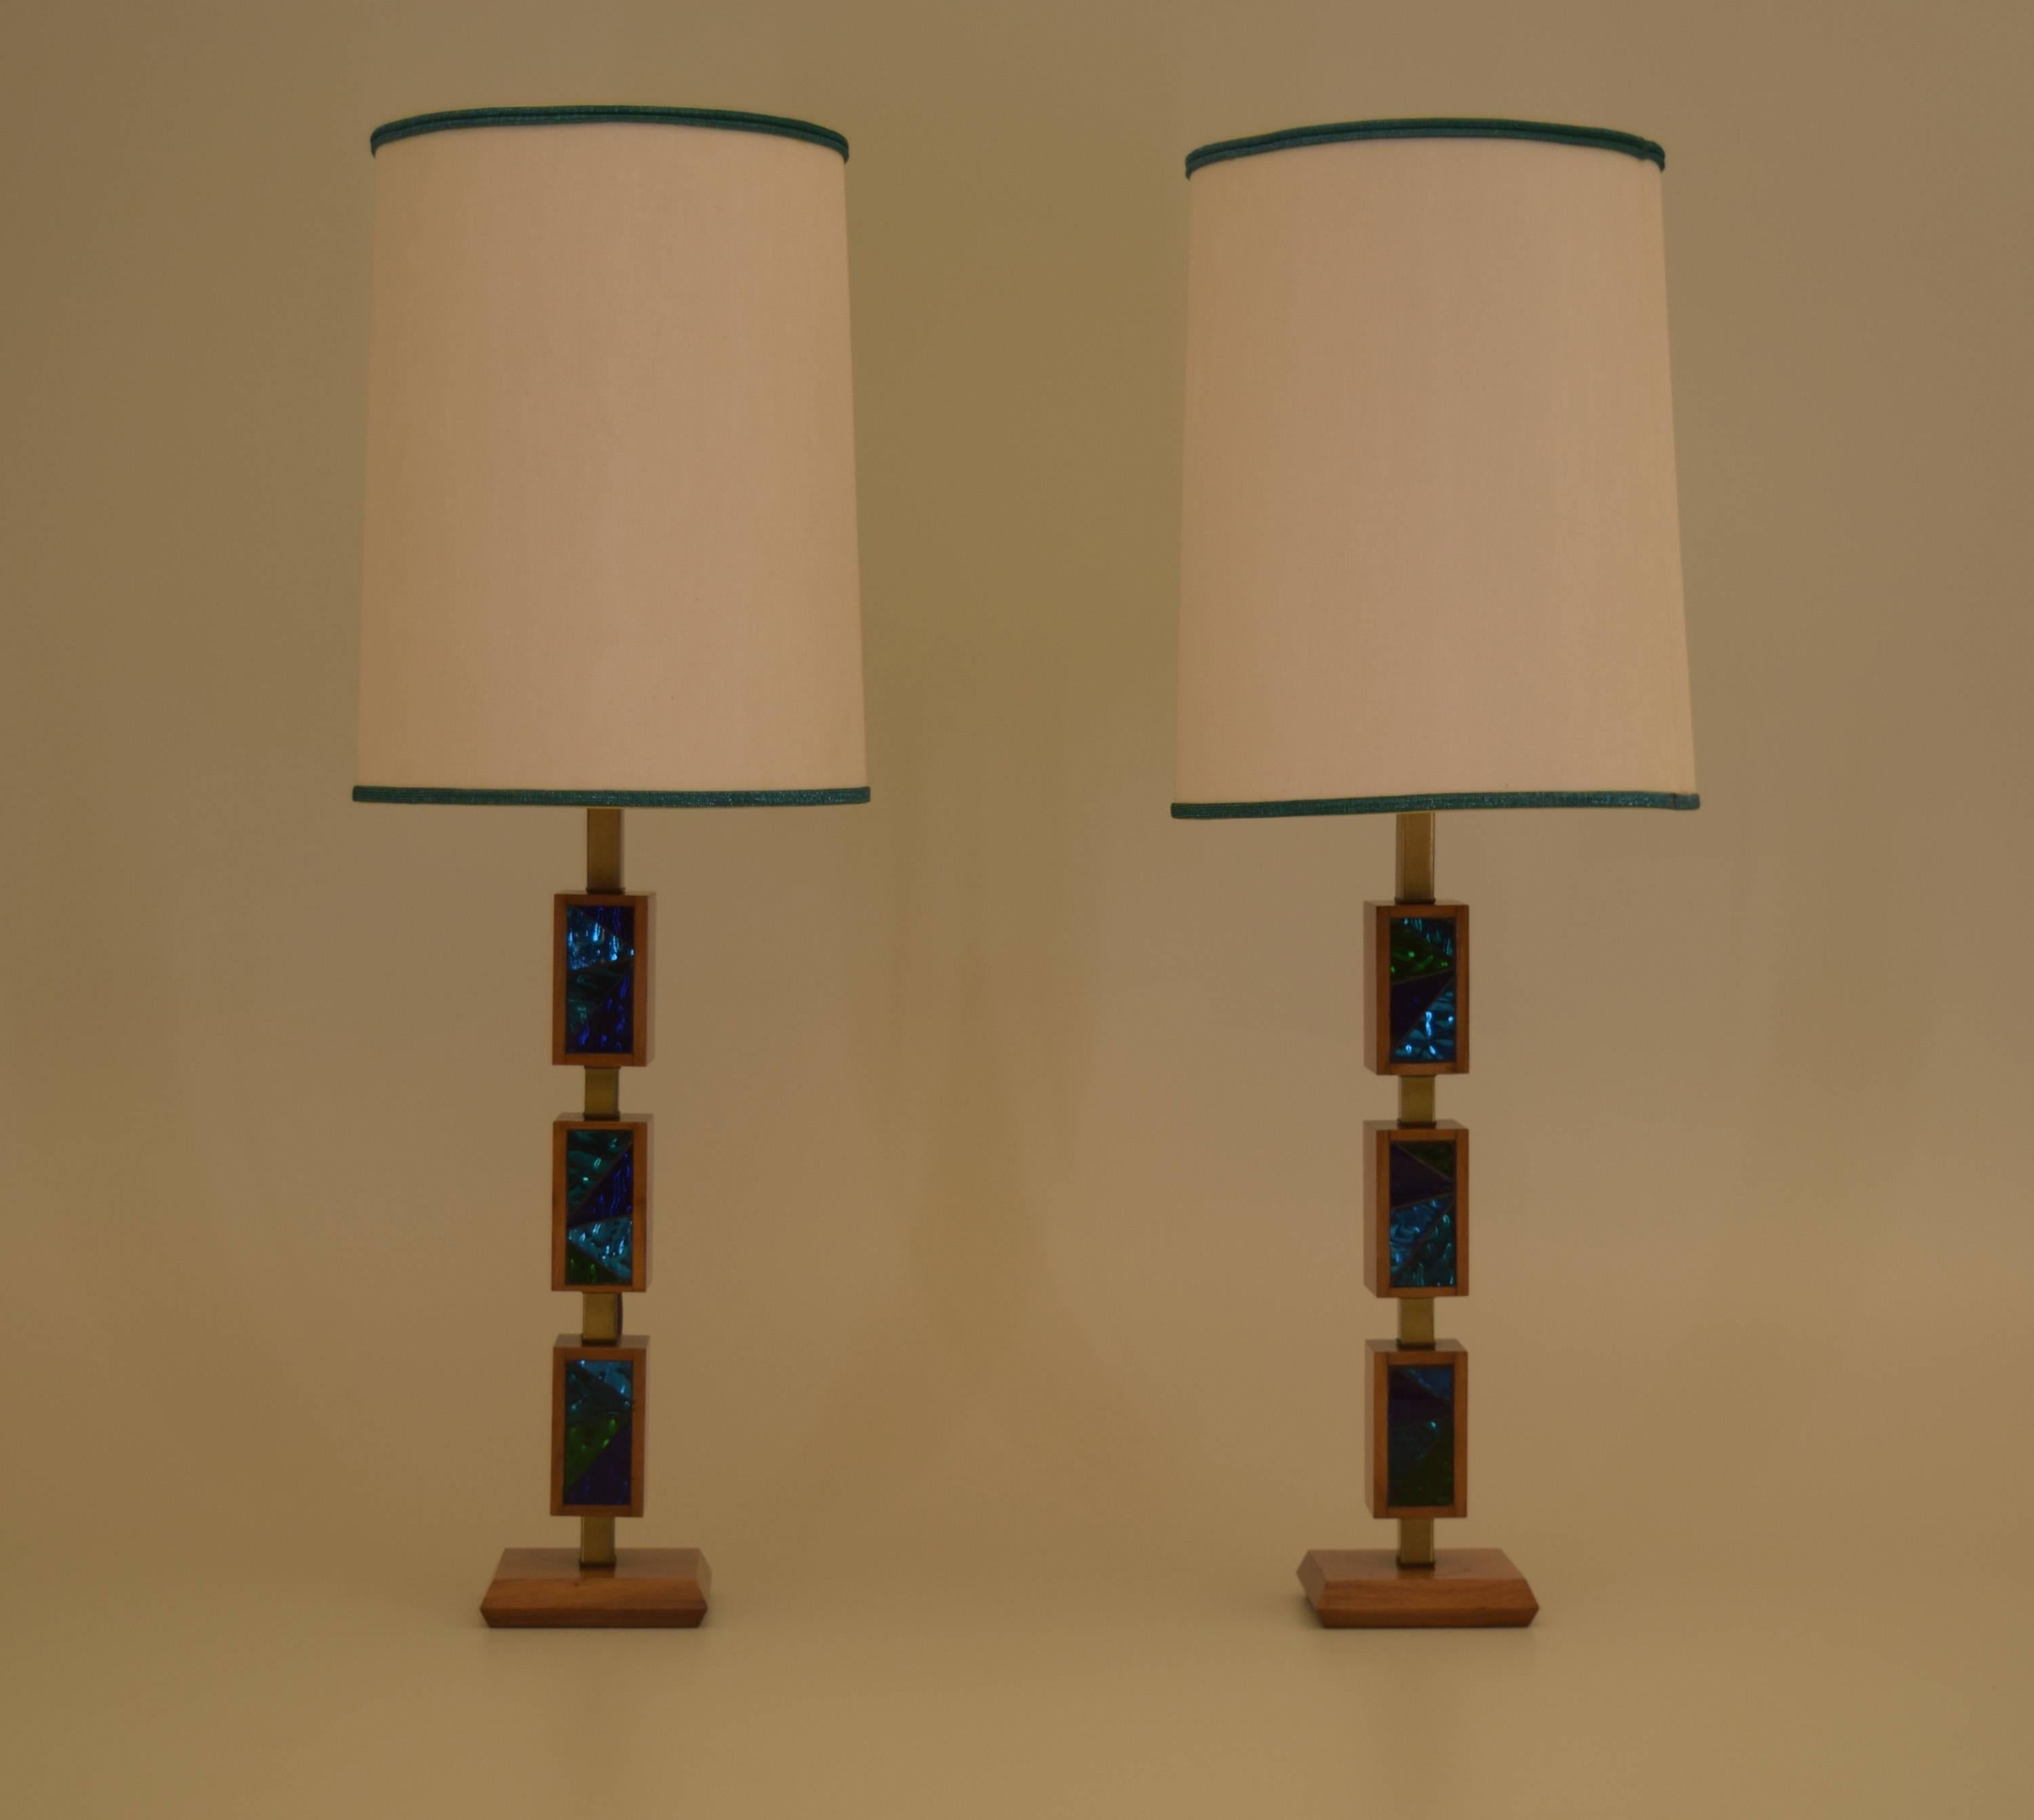 20th Century Vintage Cubist Mosaic Glass Positionable Table Lamp, Pair by Georges Briard